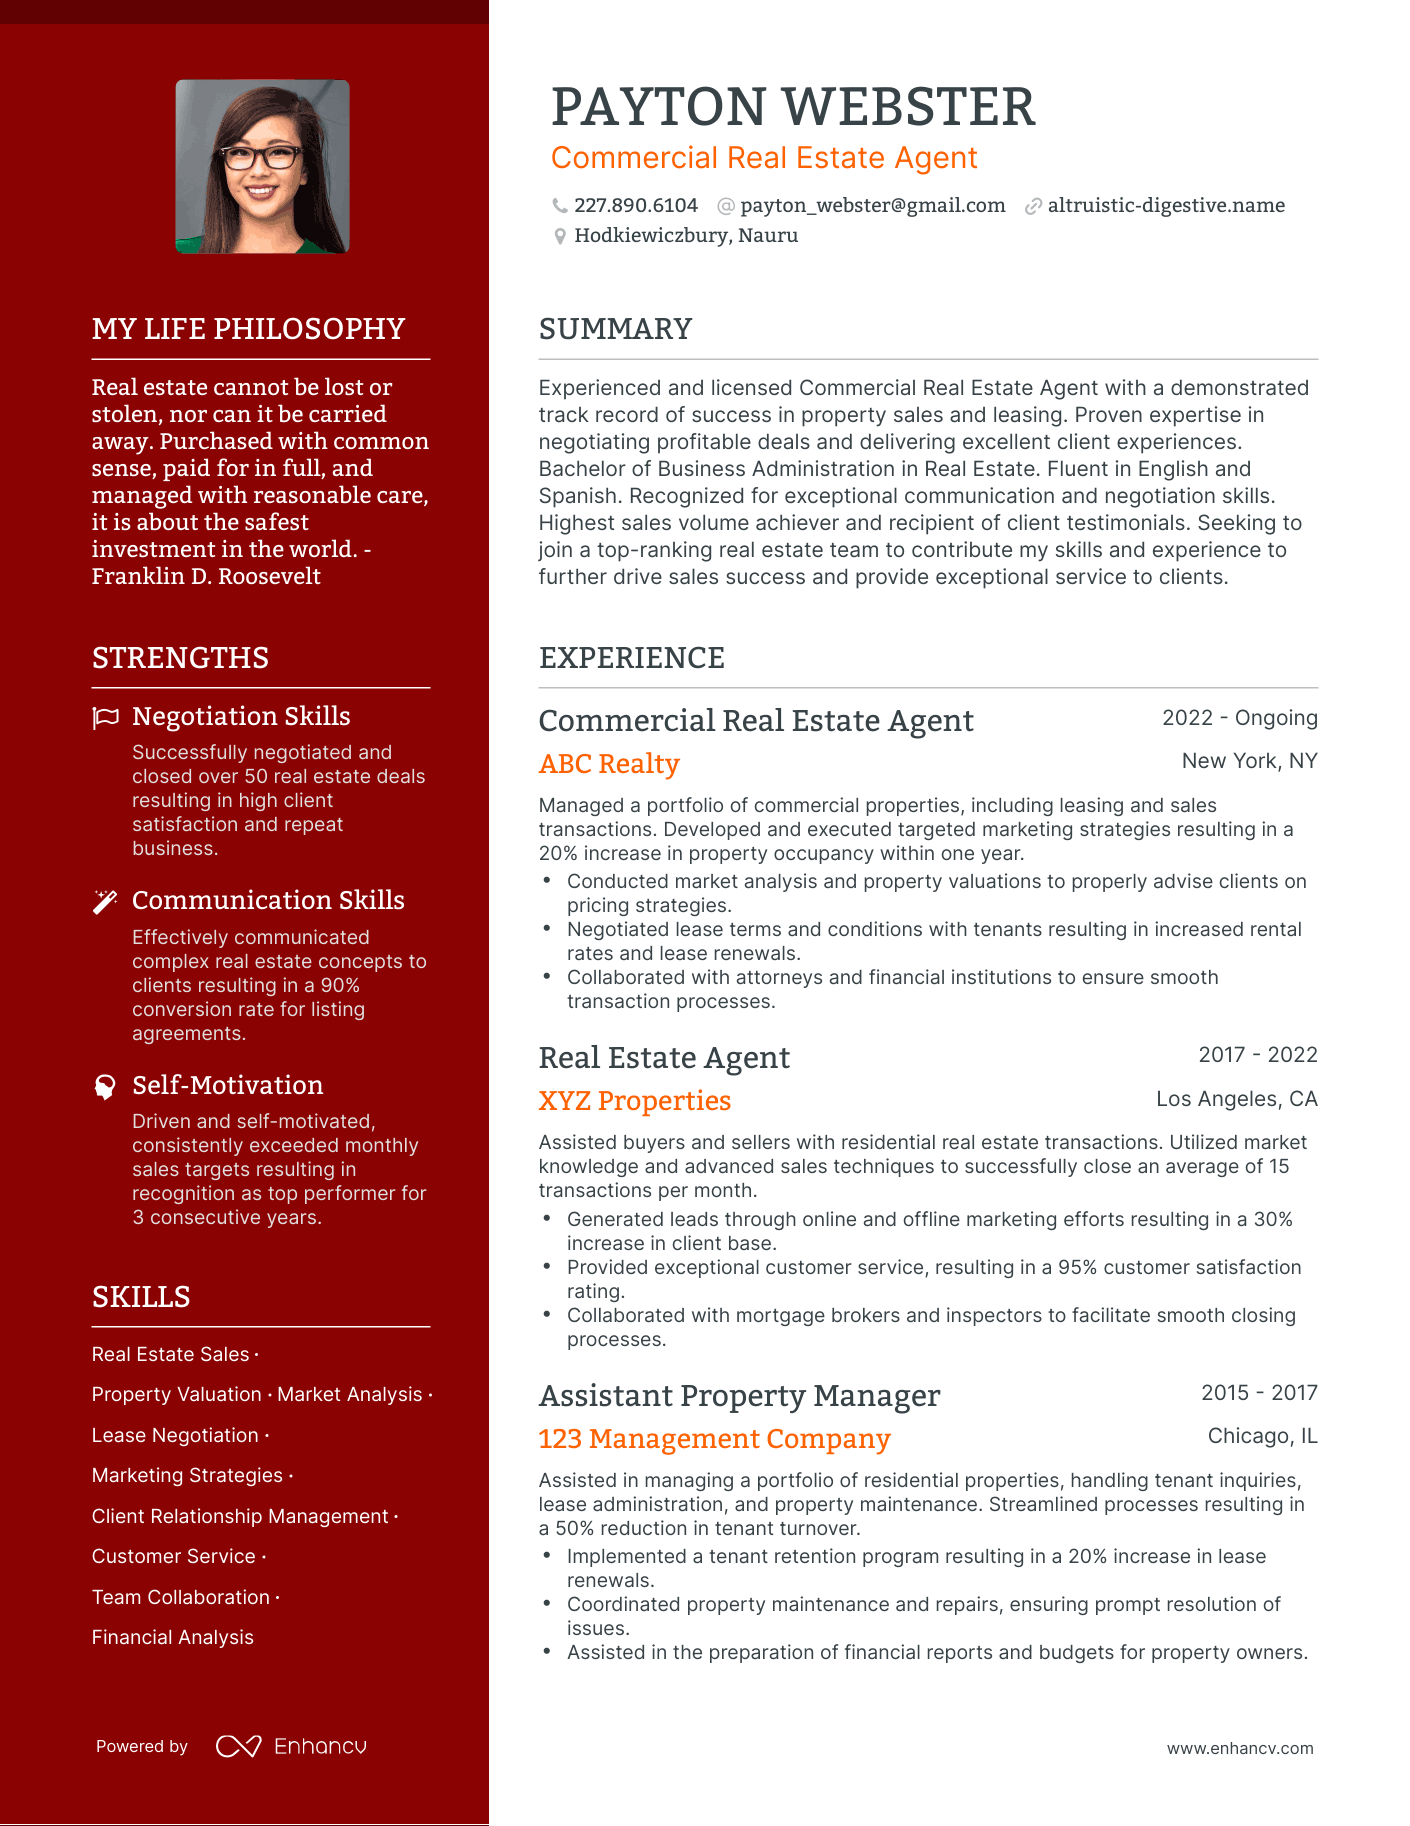 Creative Commercial Real Estate Agent Resume Example